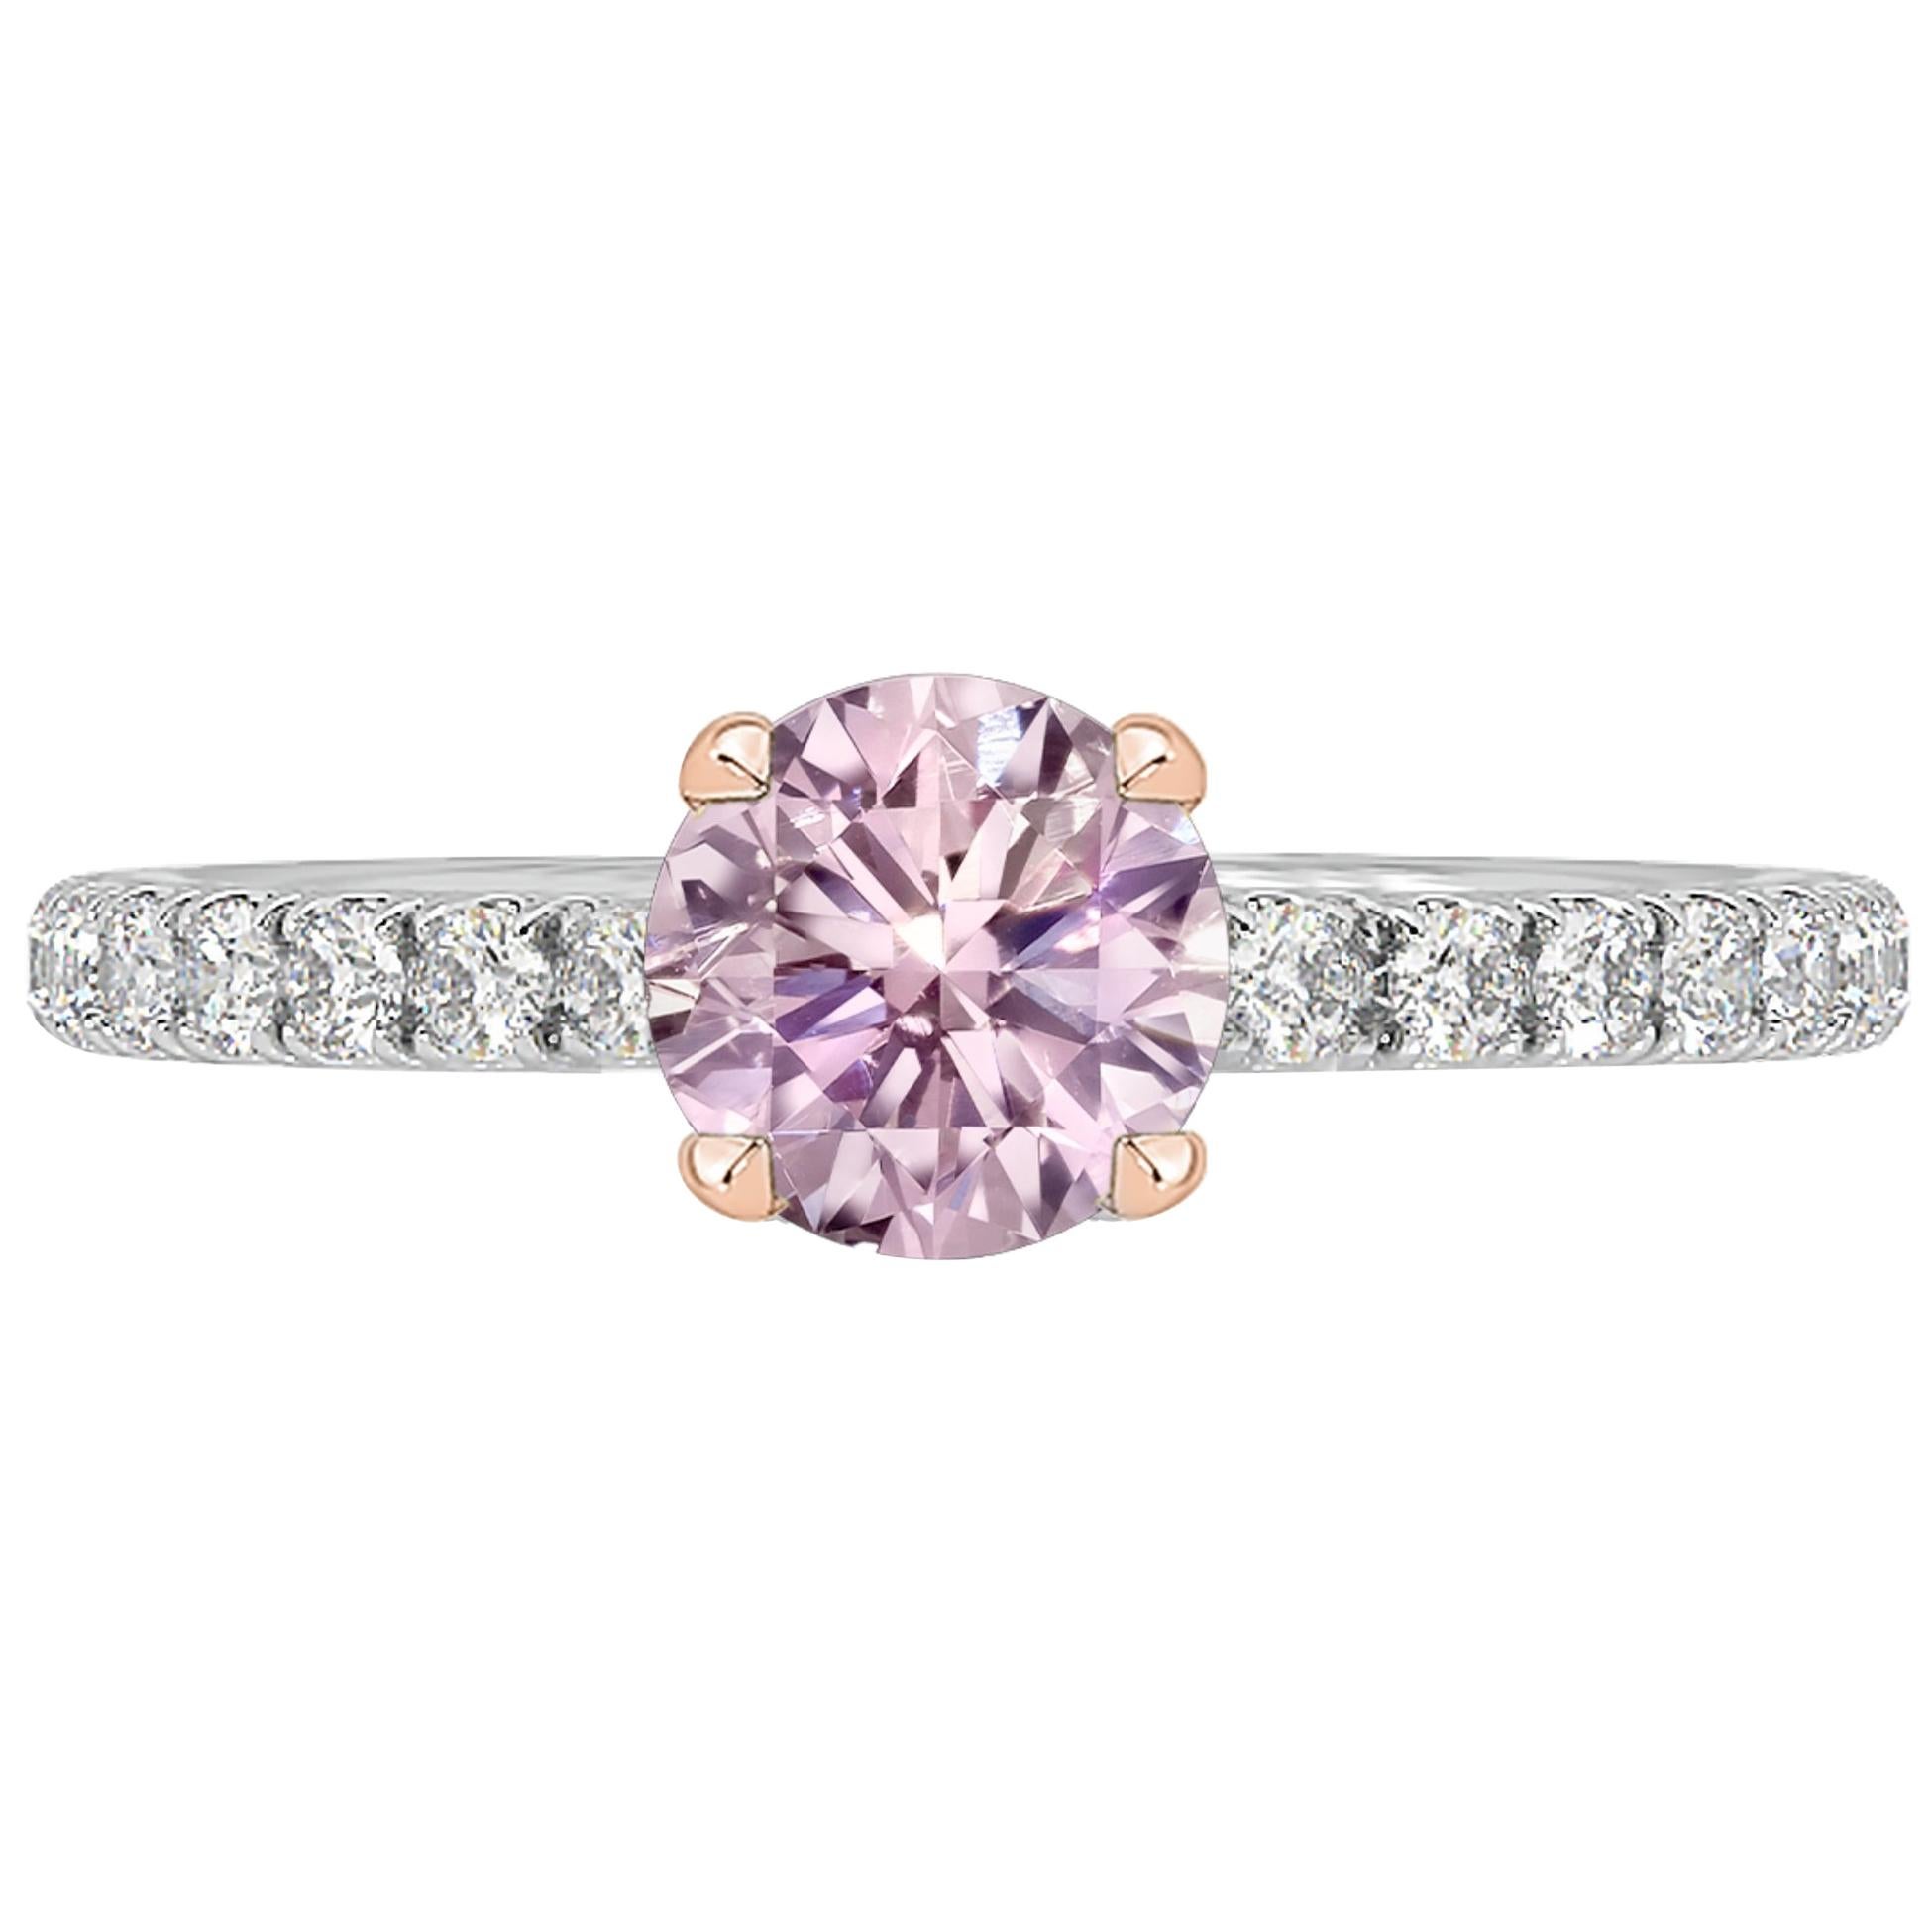 GIA Certified 0.50 Carat Round Brilliant Pink Diamond Ring For Sale